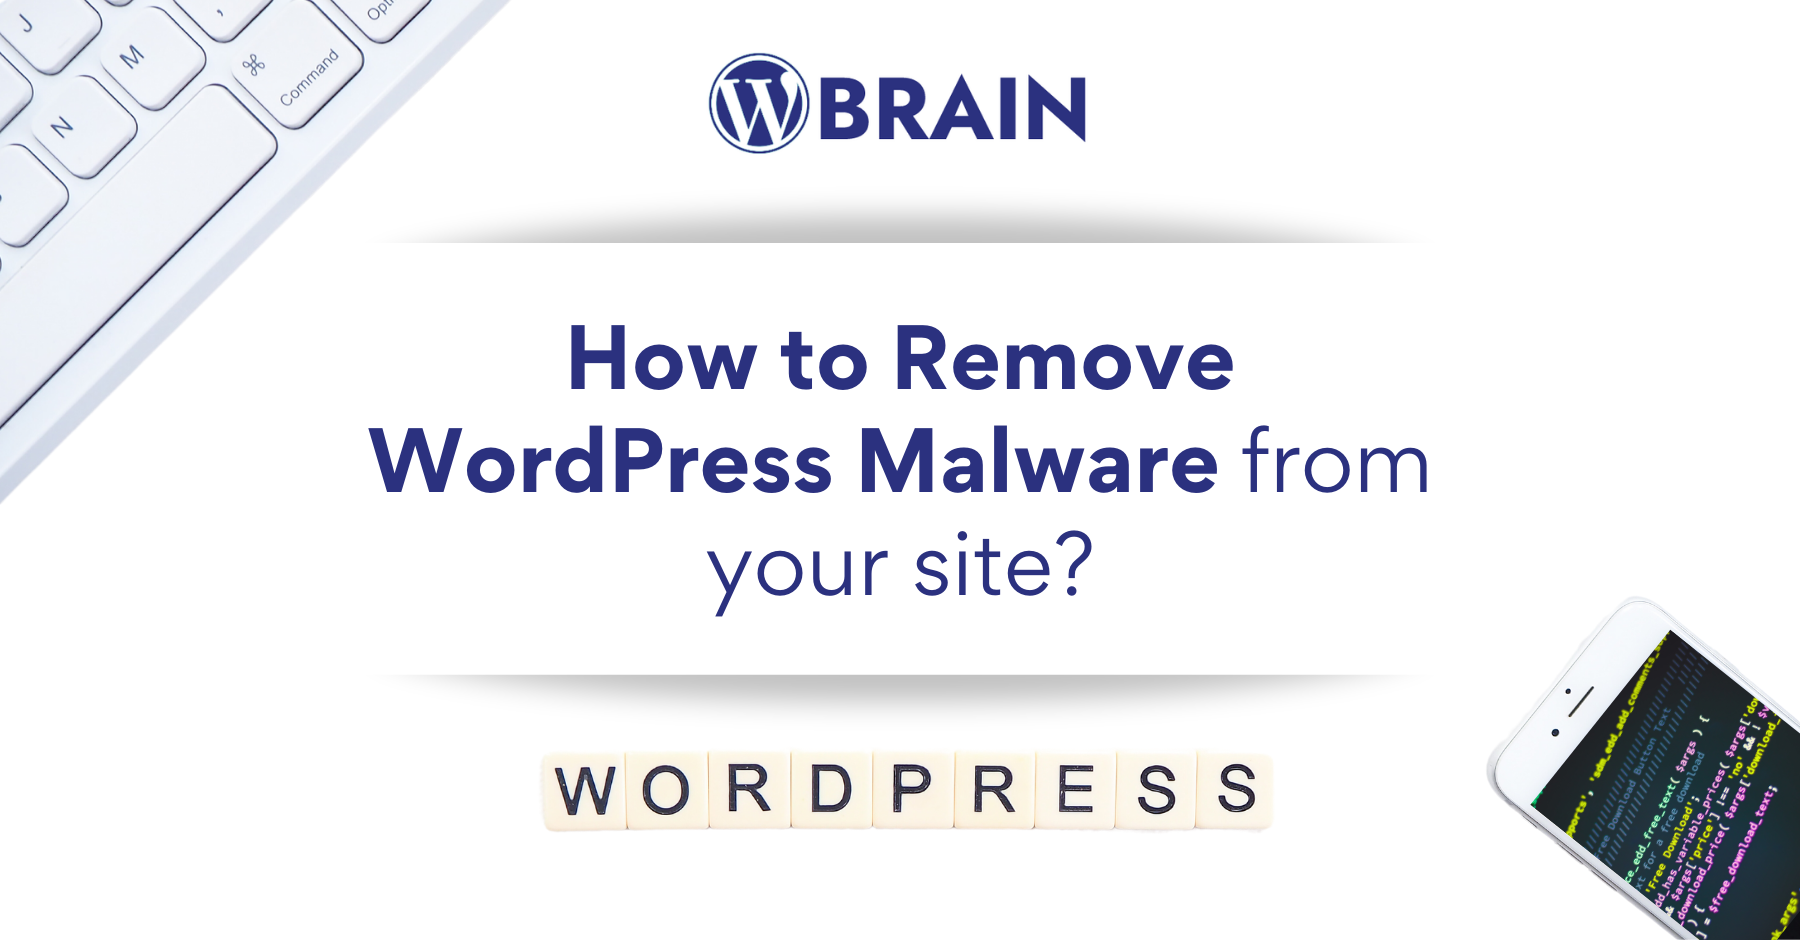 How to Remove WordPress Malware from your site